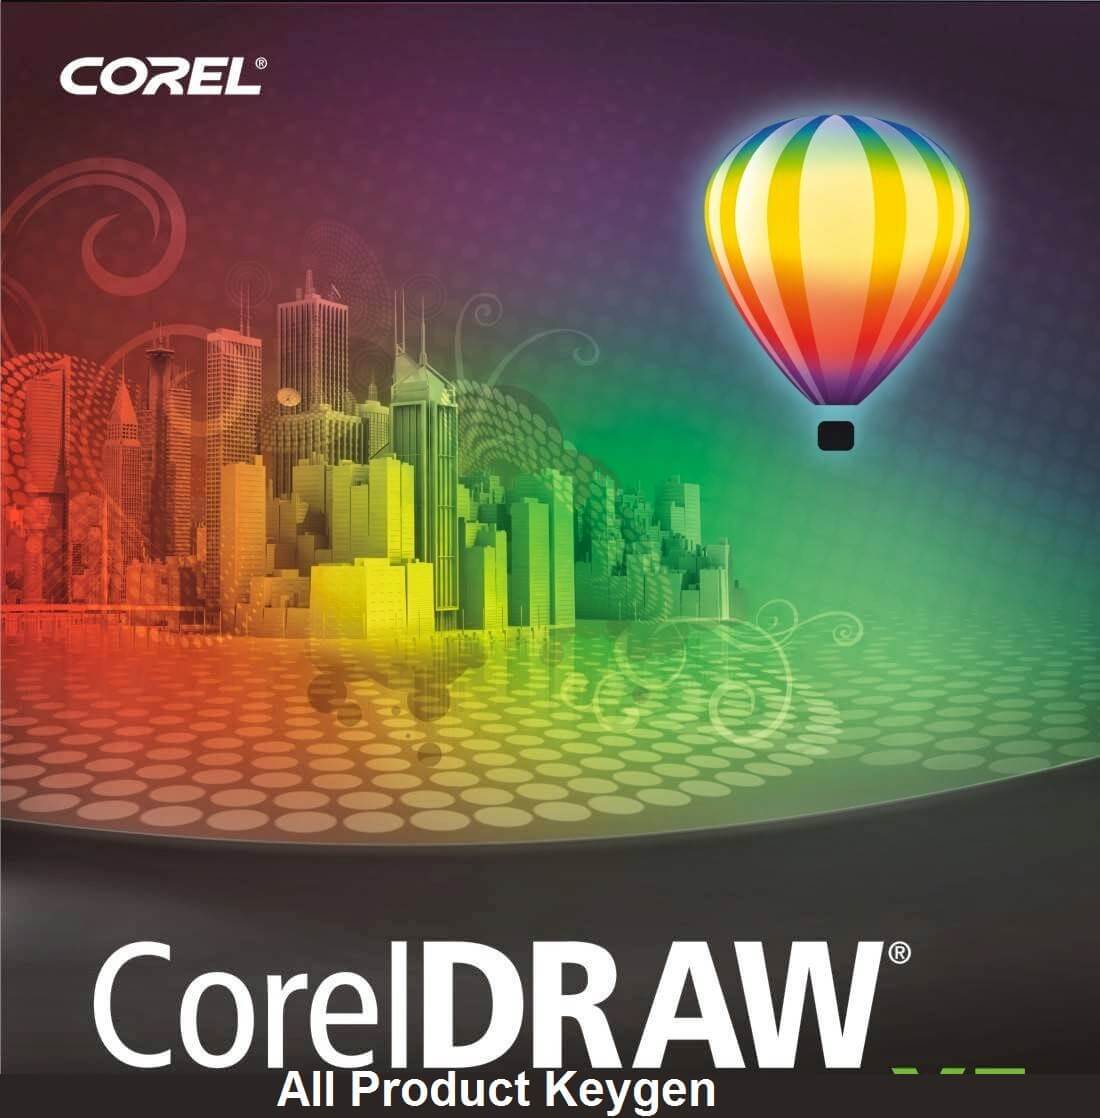 coreldraw 15 free download full version with crack